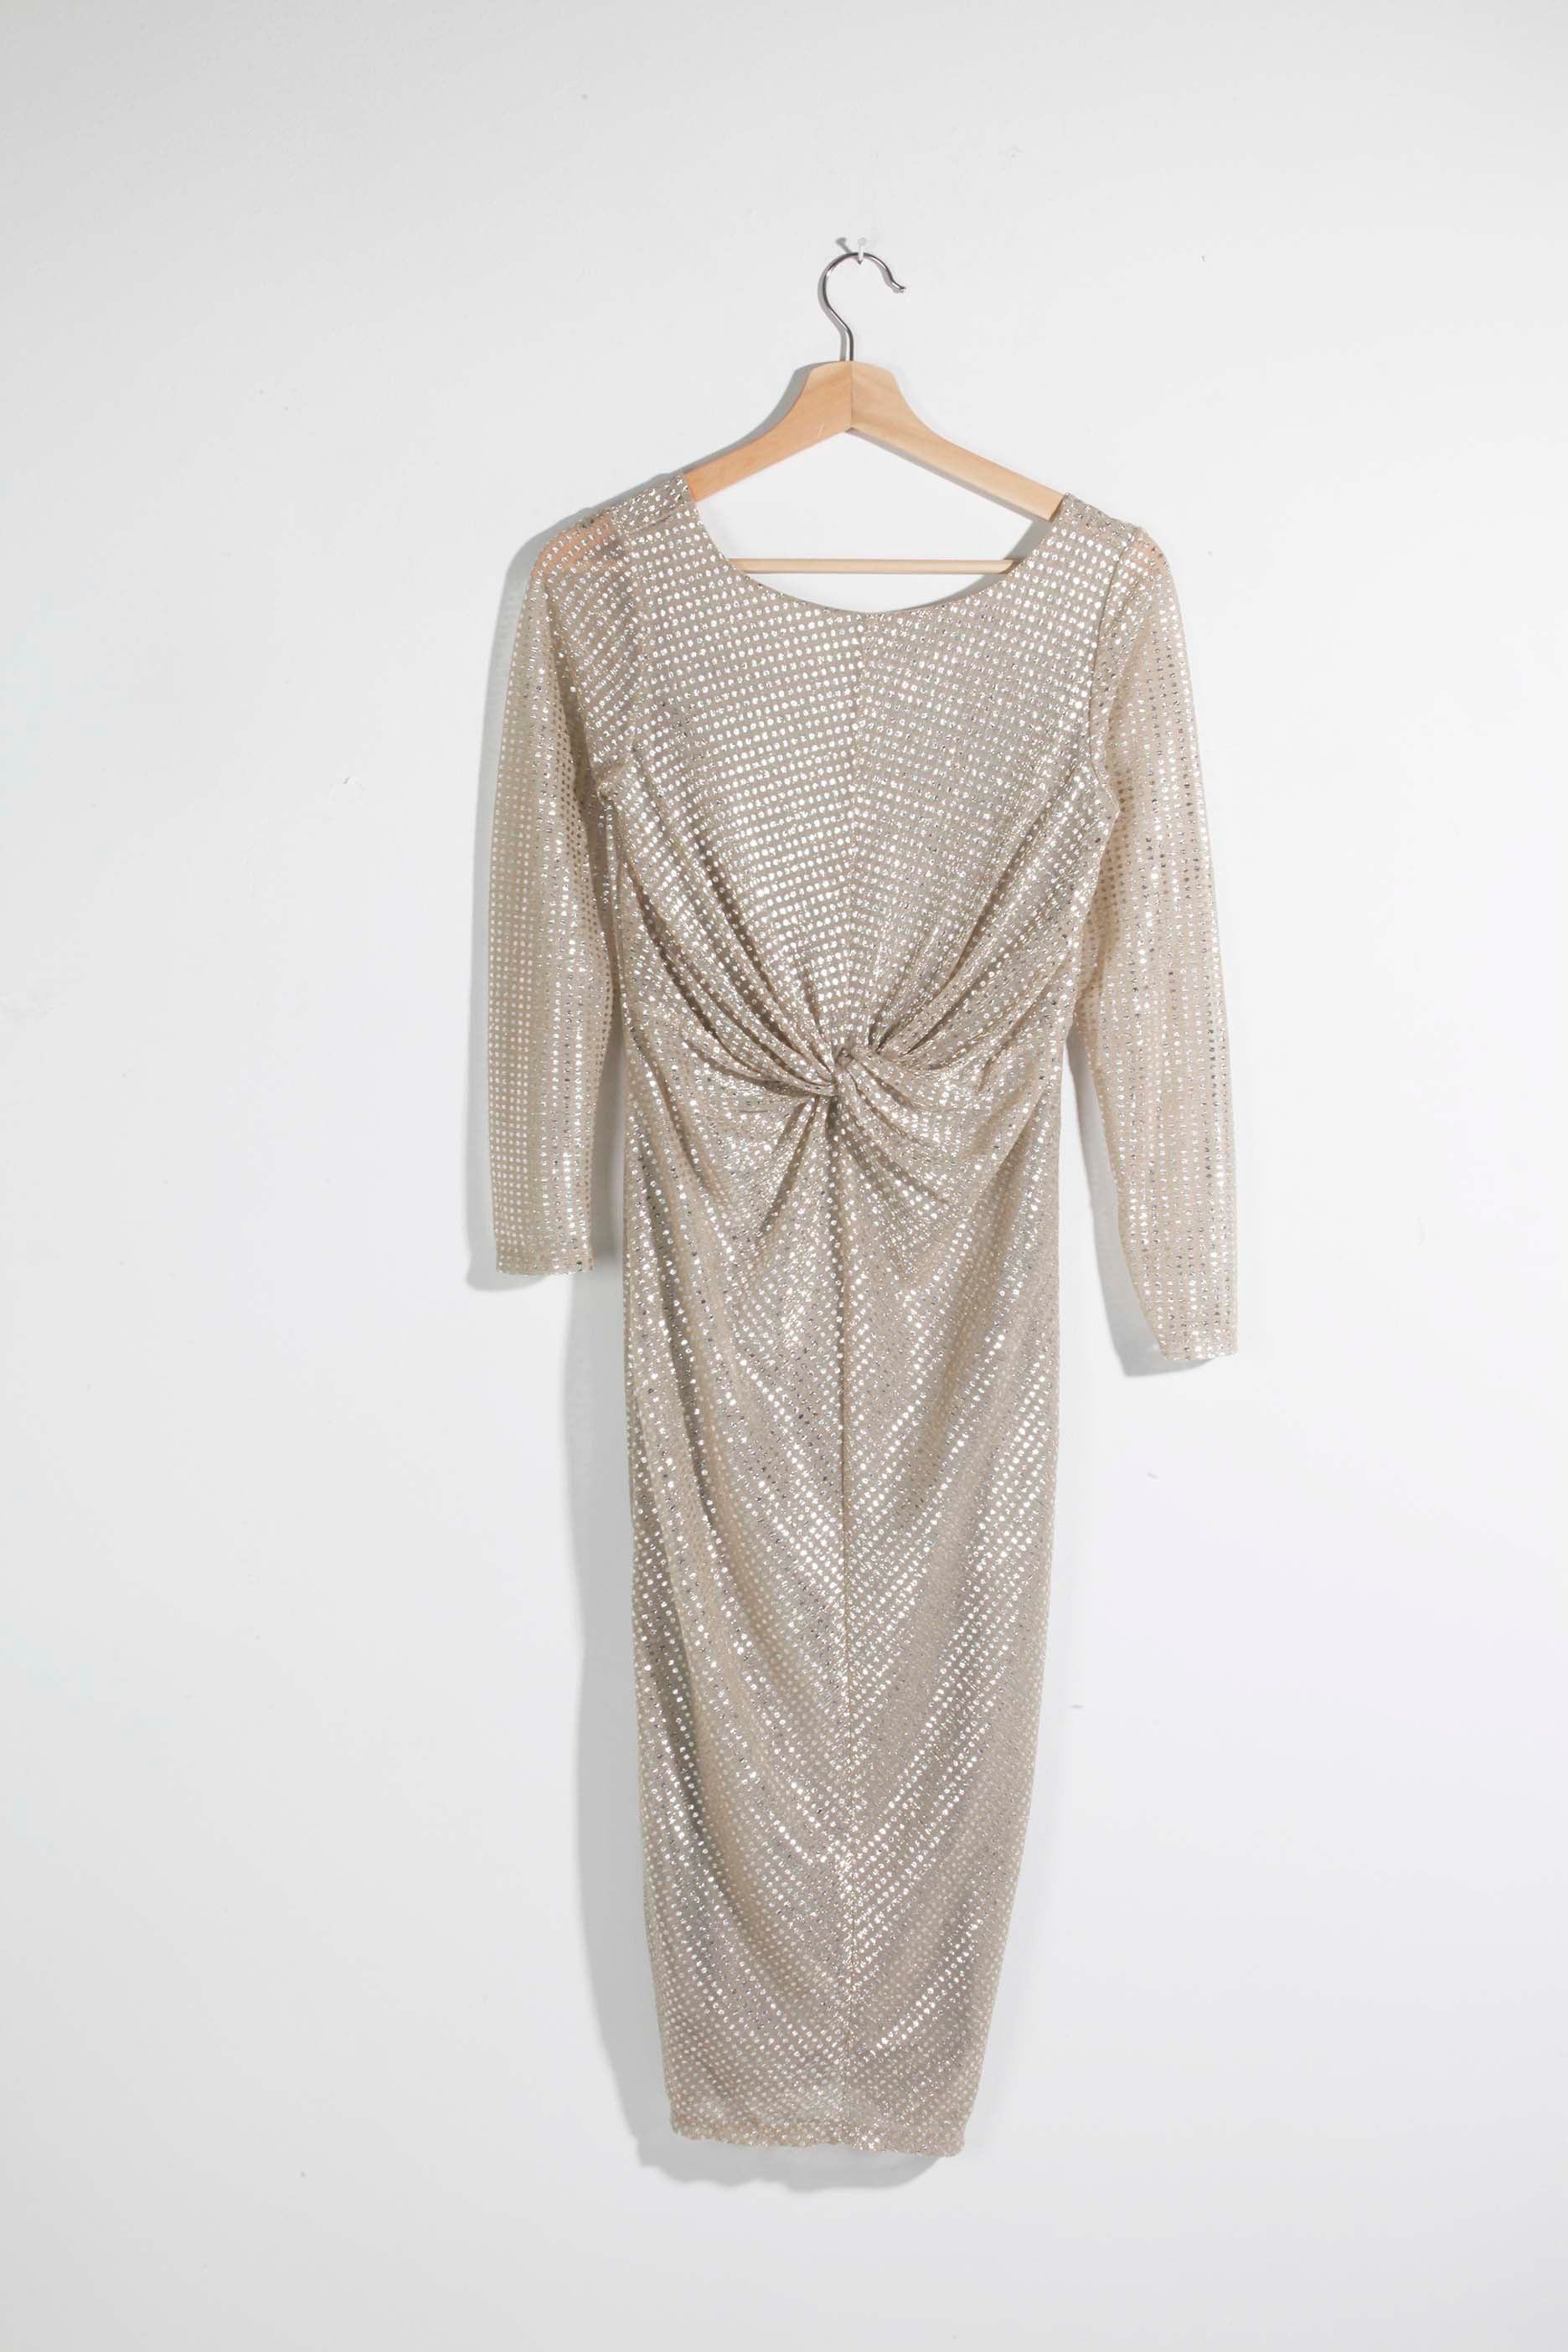 Silver Sequin Dress with Knot Waist